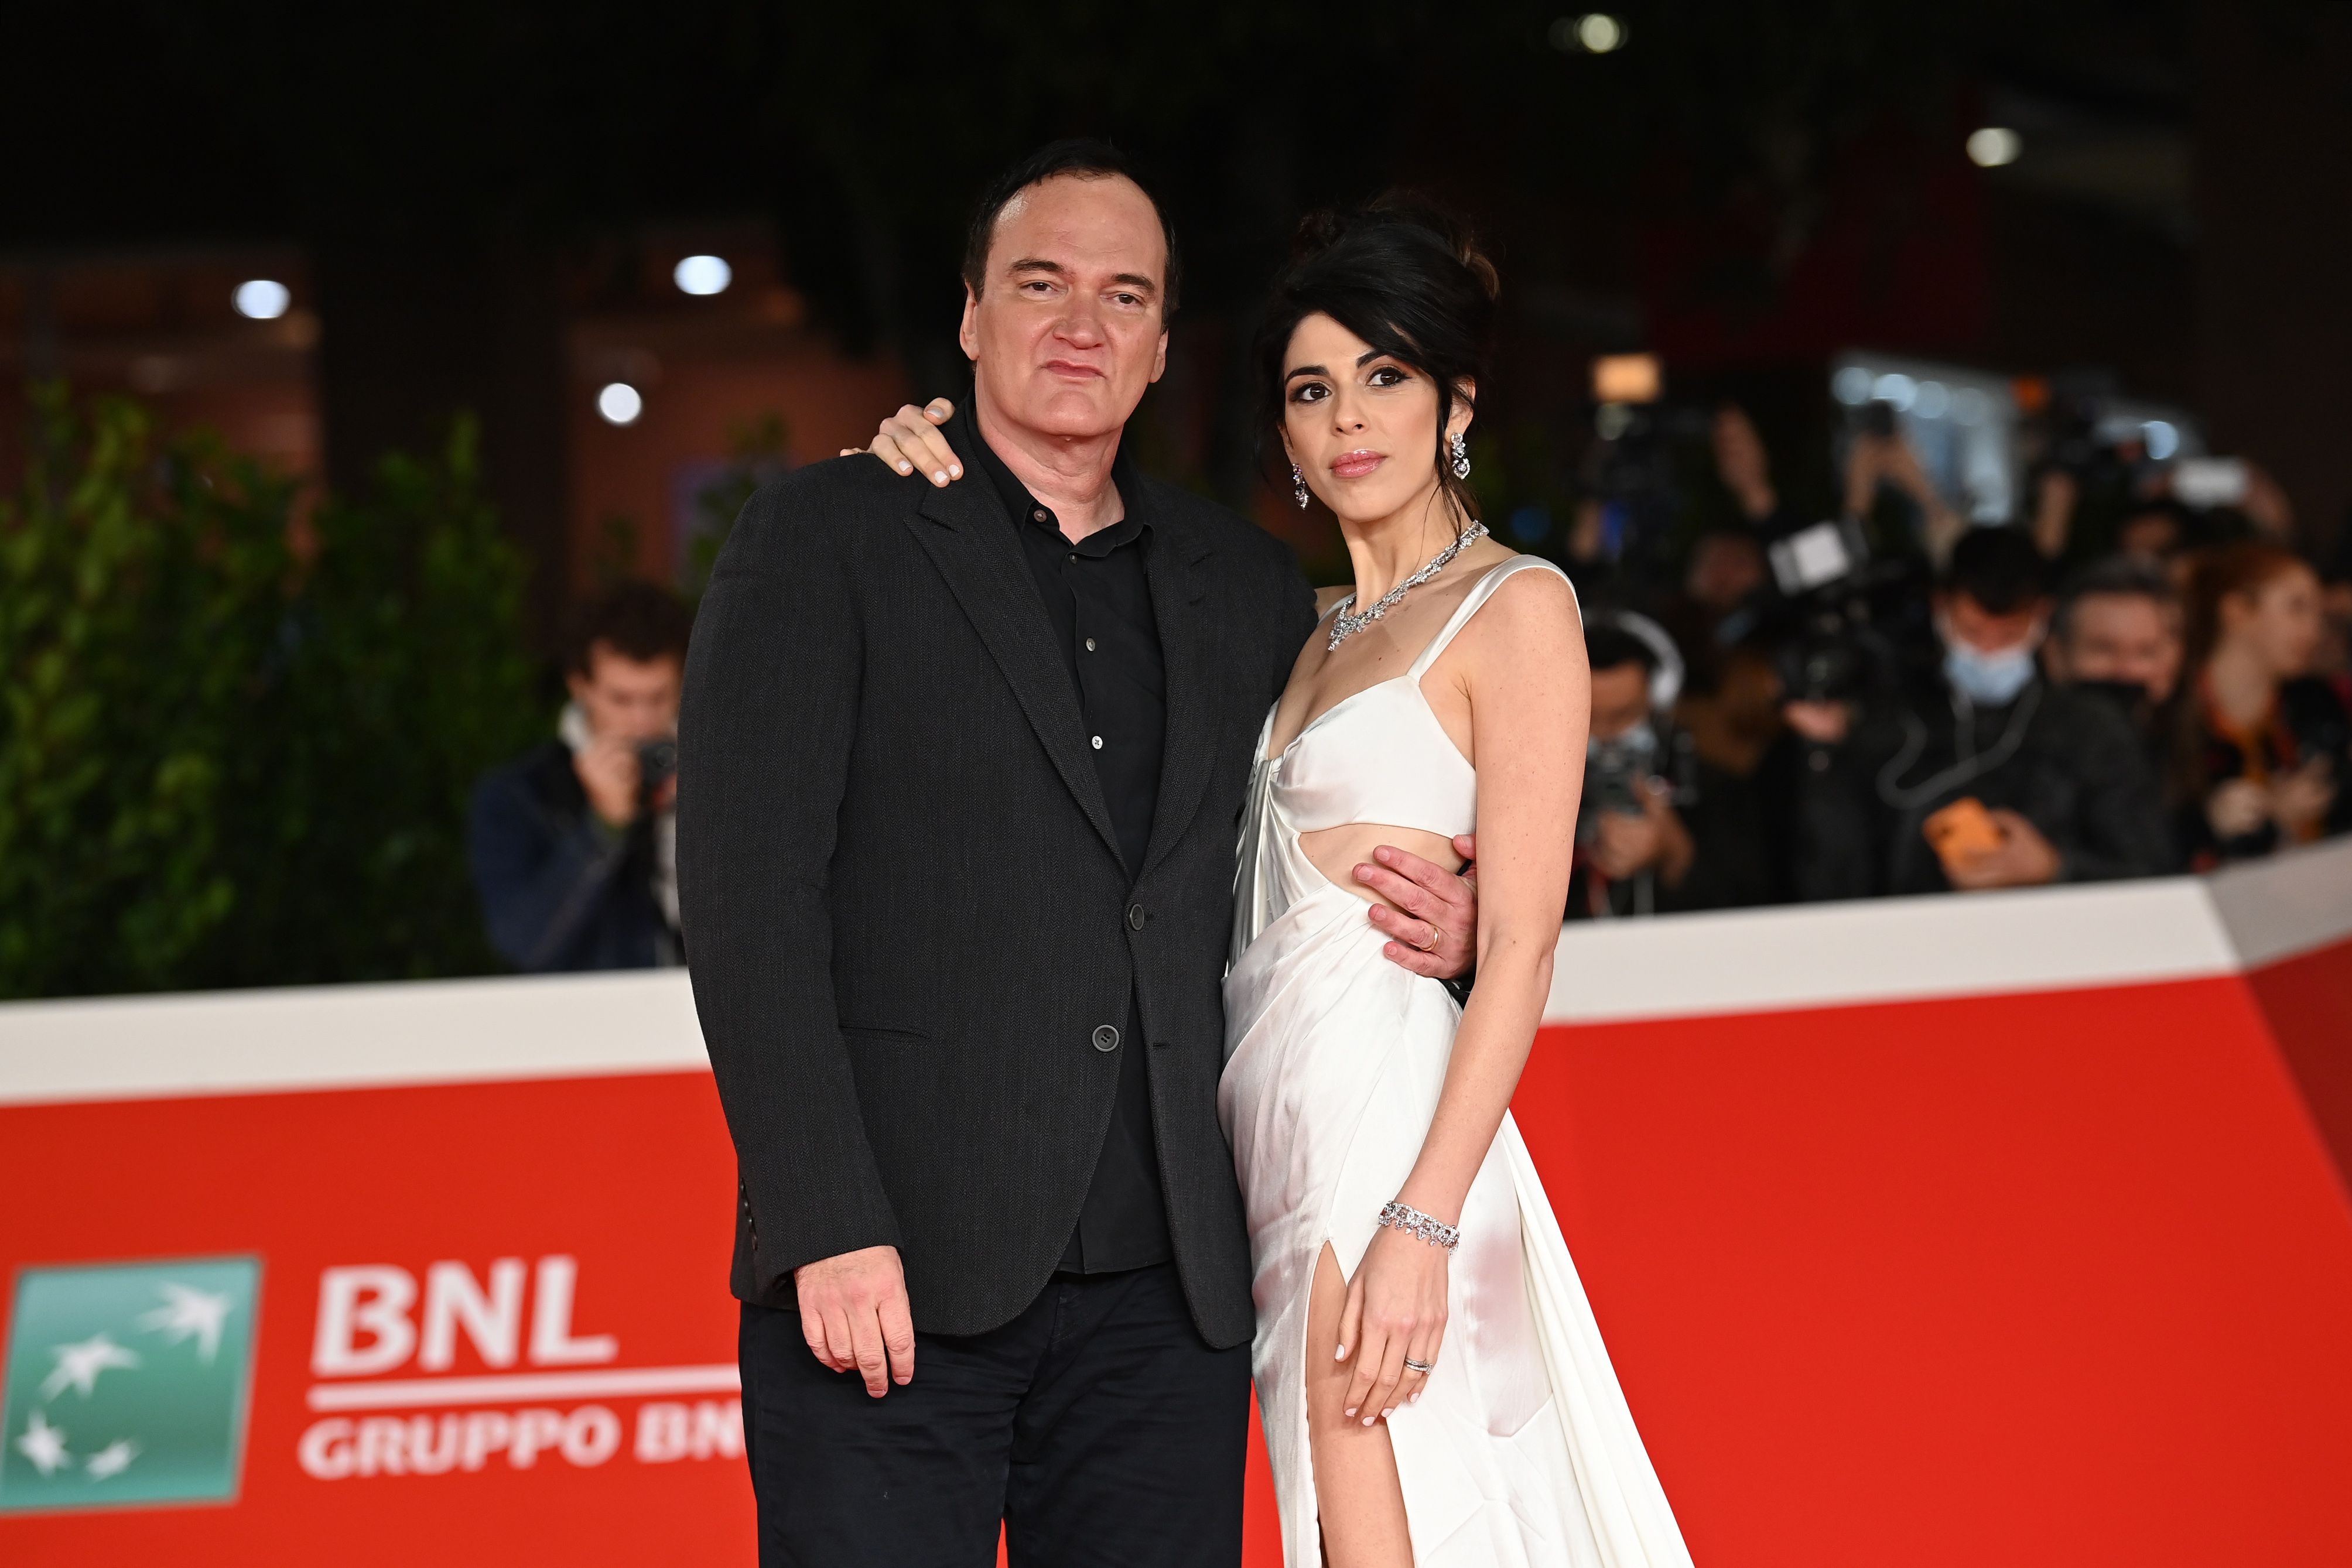 <p><span>Oscar-winning filmmaker Quentin Tarantino is more than 20 years older than wife Daniella Pick, an Israeli singer who's the daughter of Israeli pop star Svika Pick. "I was in Israel for the premiere of [my film]'Inglourious Basterds' in Tel Aviv and I met her in a club. We danced all night," Quentin later told radio host Howard Stern of their 2009 meeting, which took place when Quentin was 46 and Daniella was 25. They went their separate ways and reconnected about seven years later. Then married in 2018 and have since welcomed two kids.</span></p>